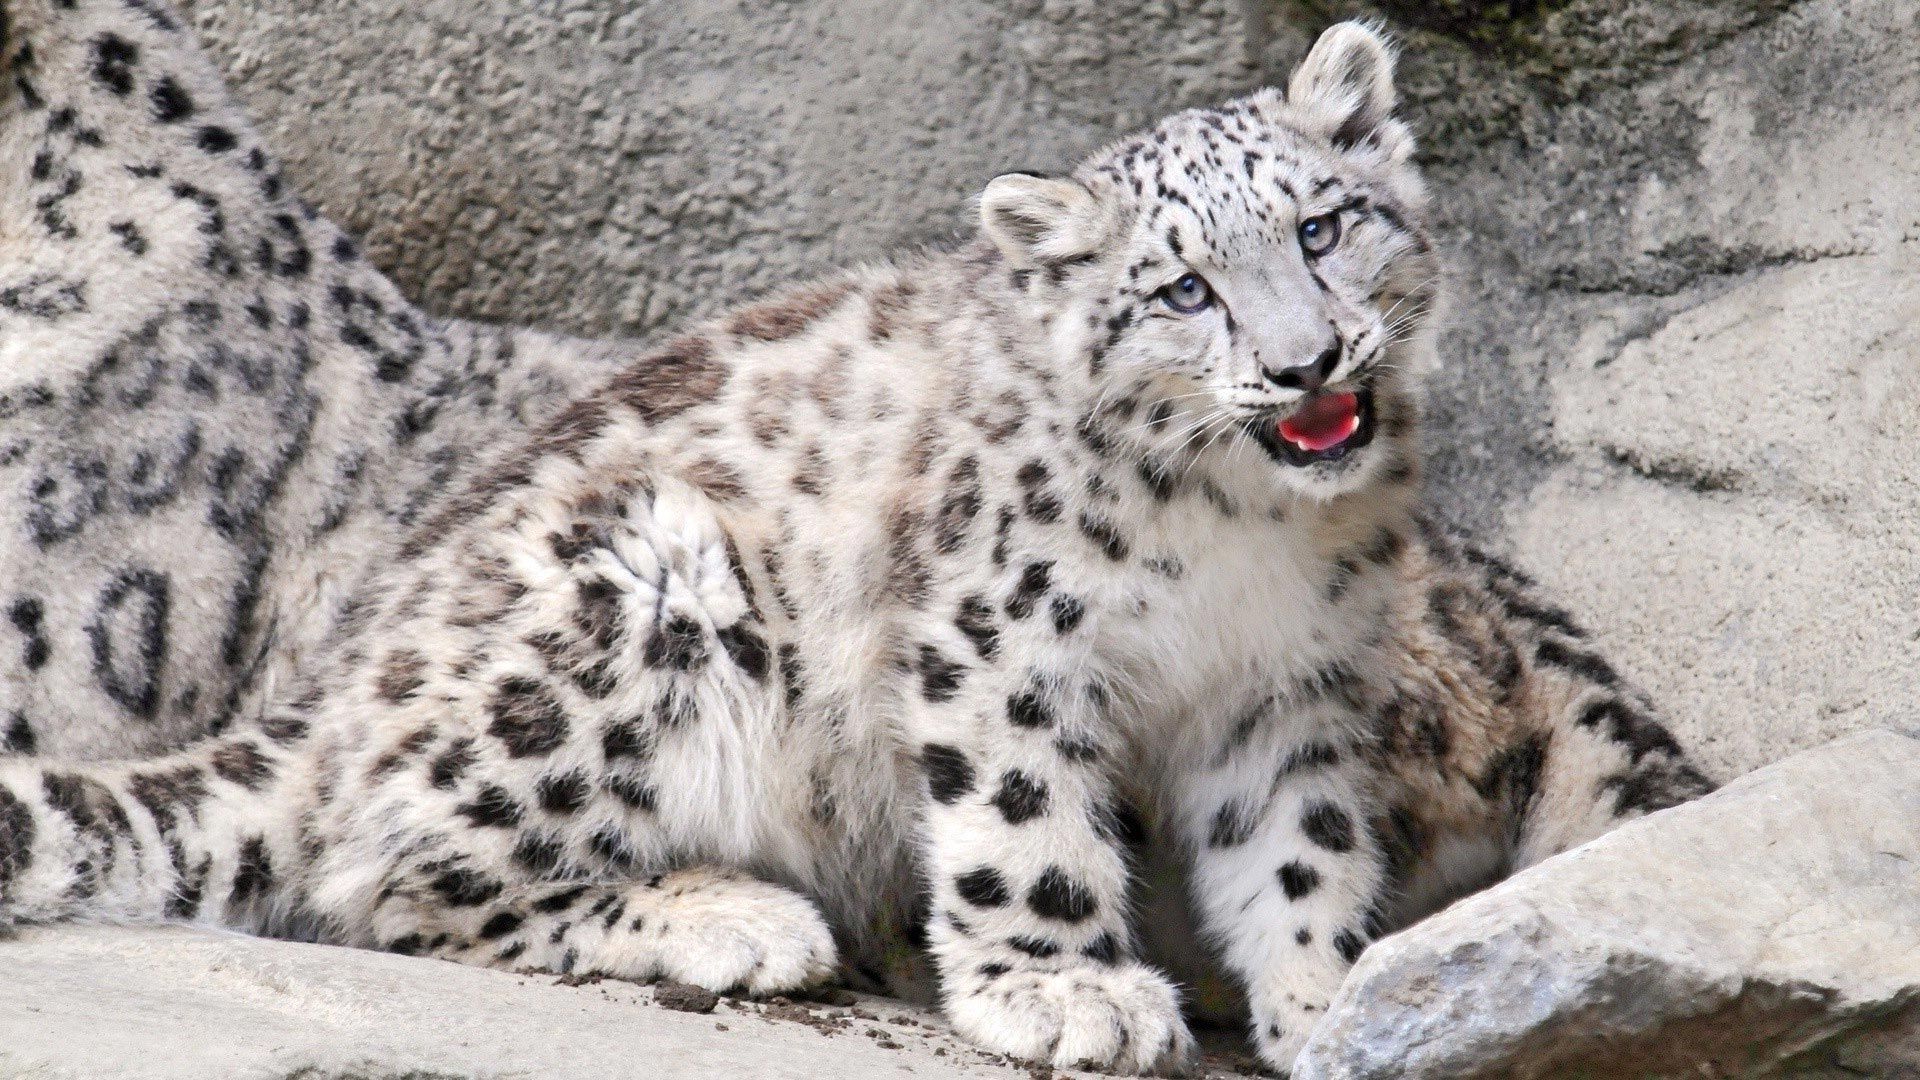 Wallpaper for mobile devices joey, to fall, animals, snow leopard